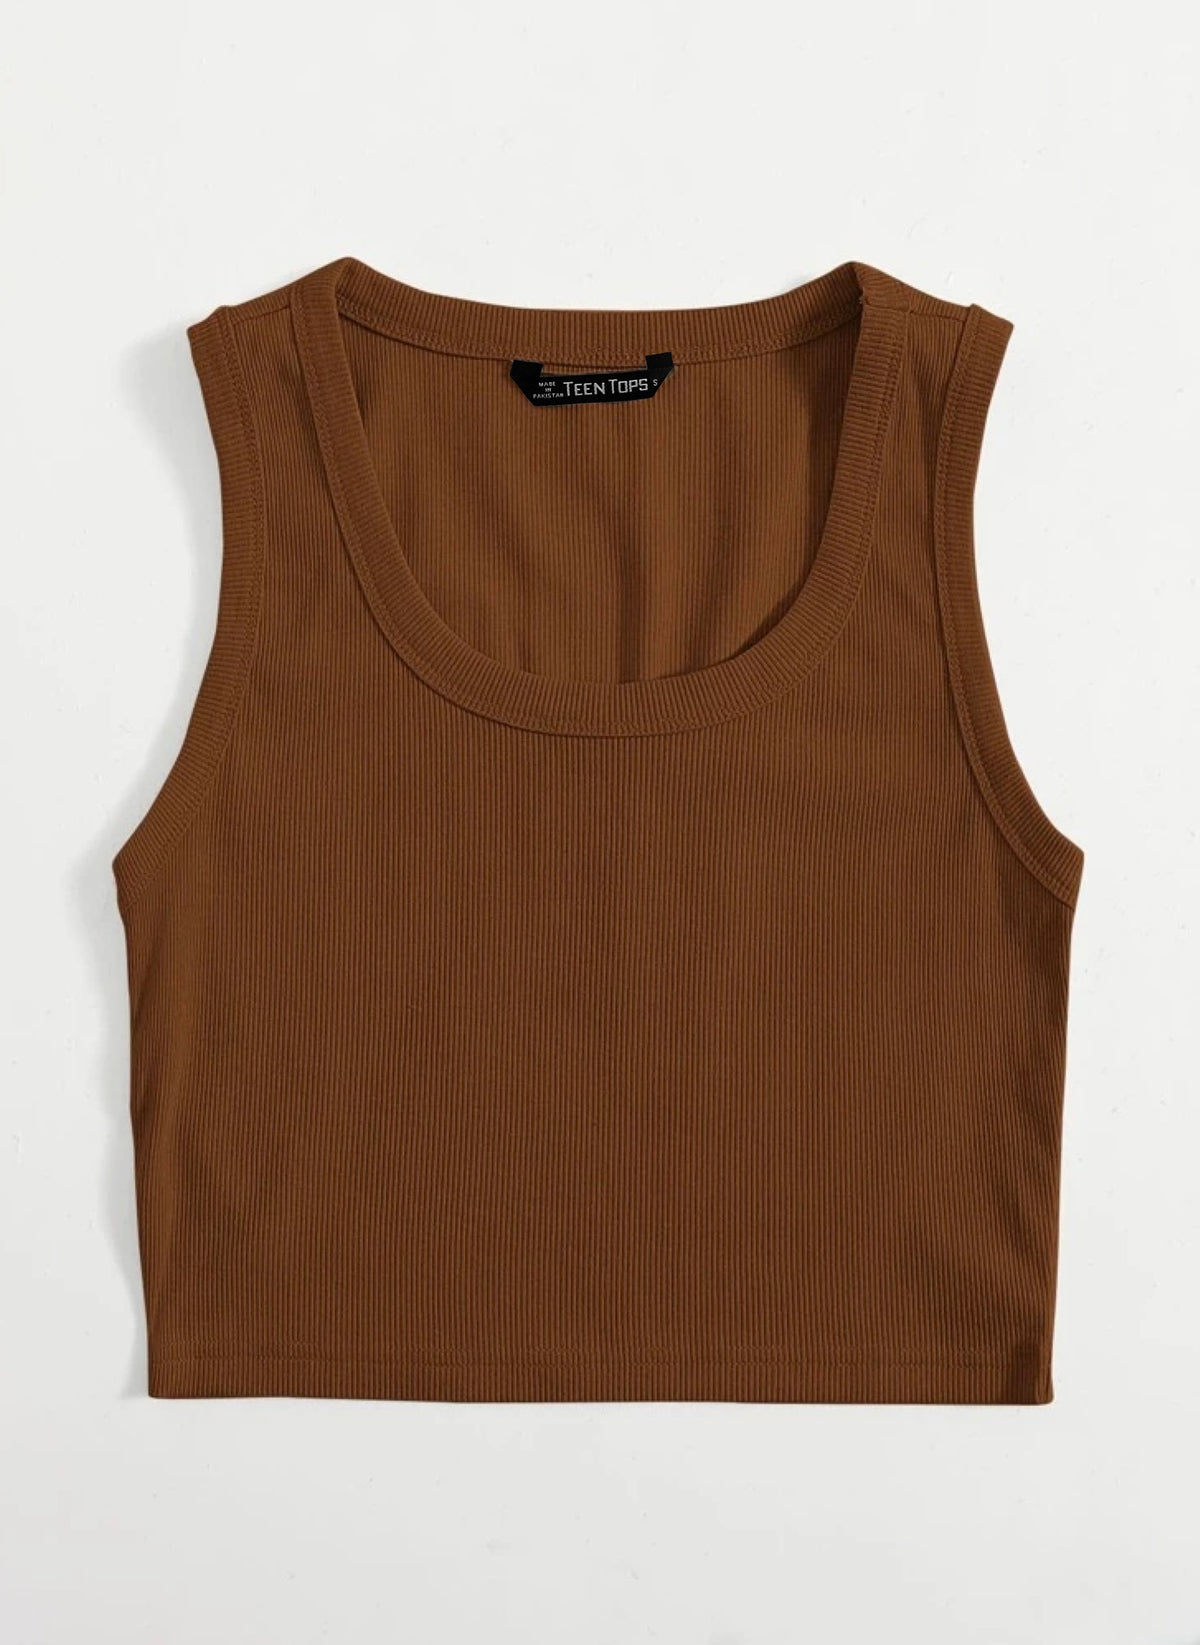 Teen Solid Coffee Brown Scoop Neck Rib Fitted Tank Top